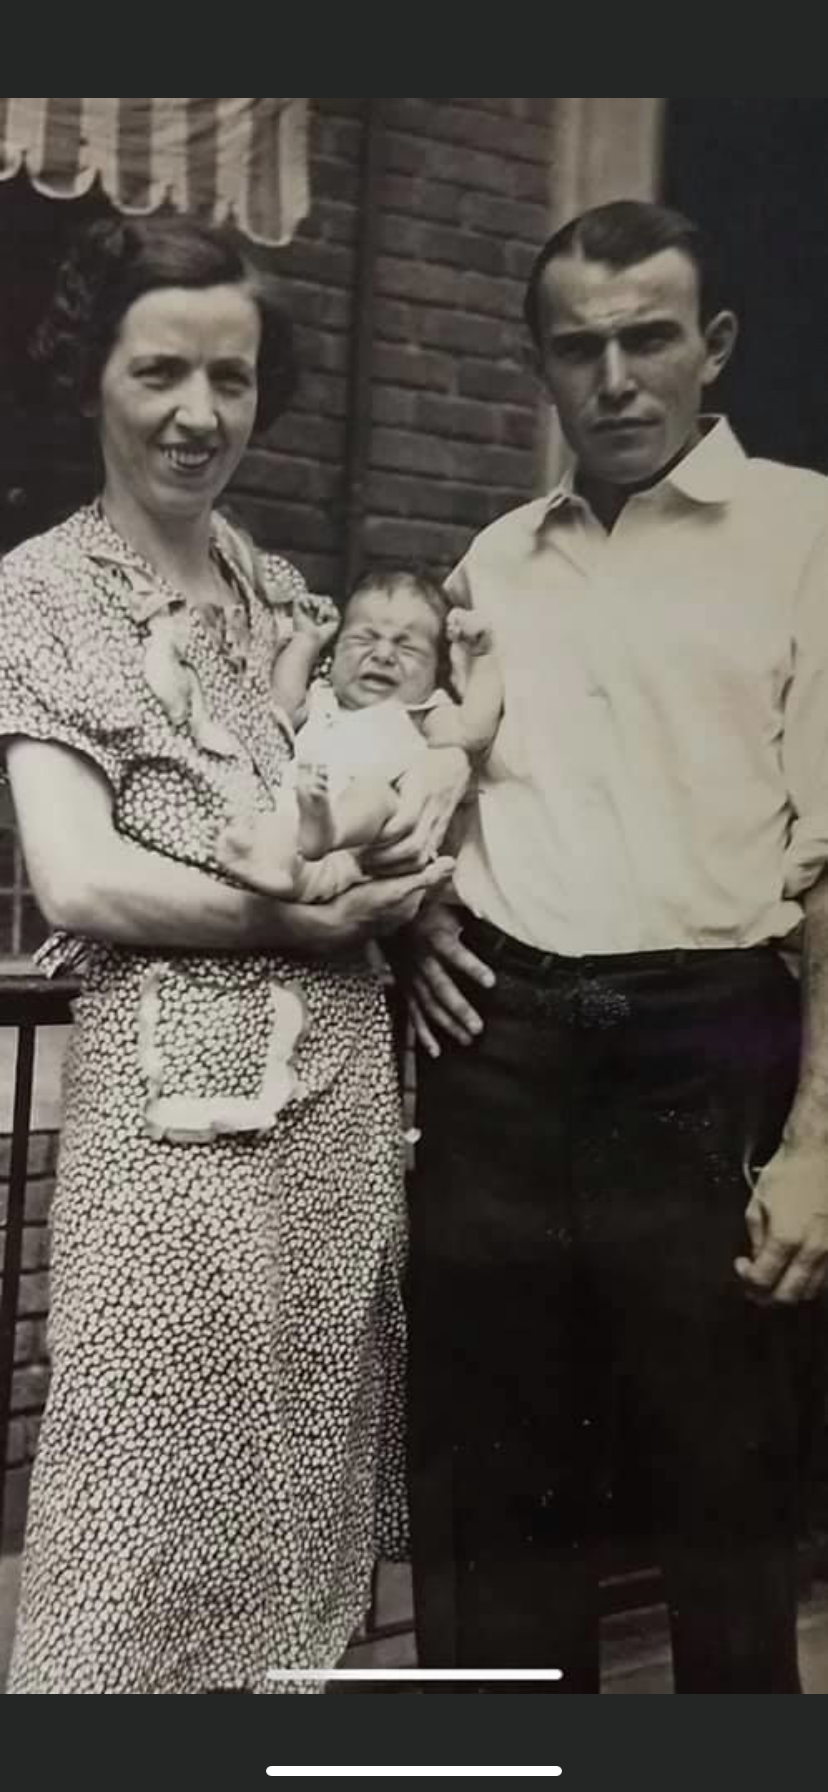  Louis Magarine and wife Florence Maher (maiden name) and my father Richard a little baby. 